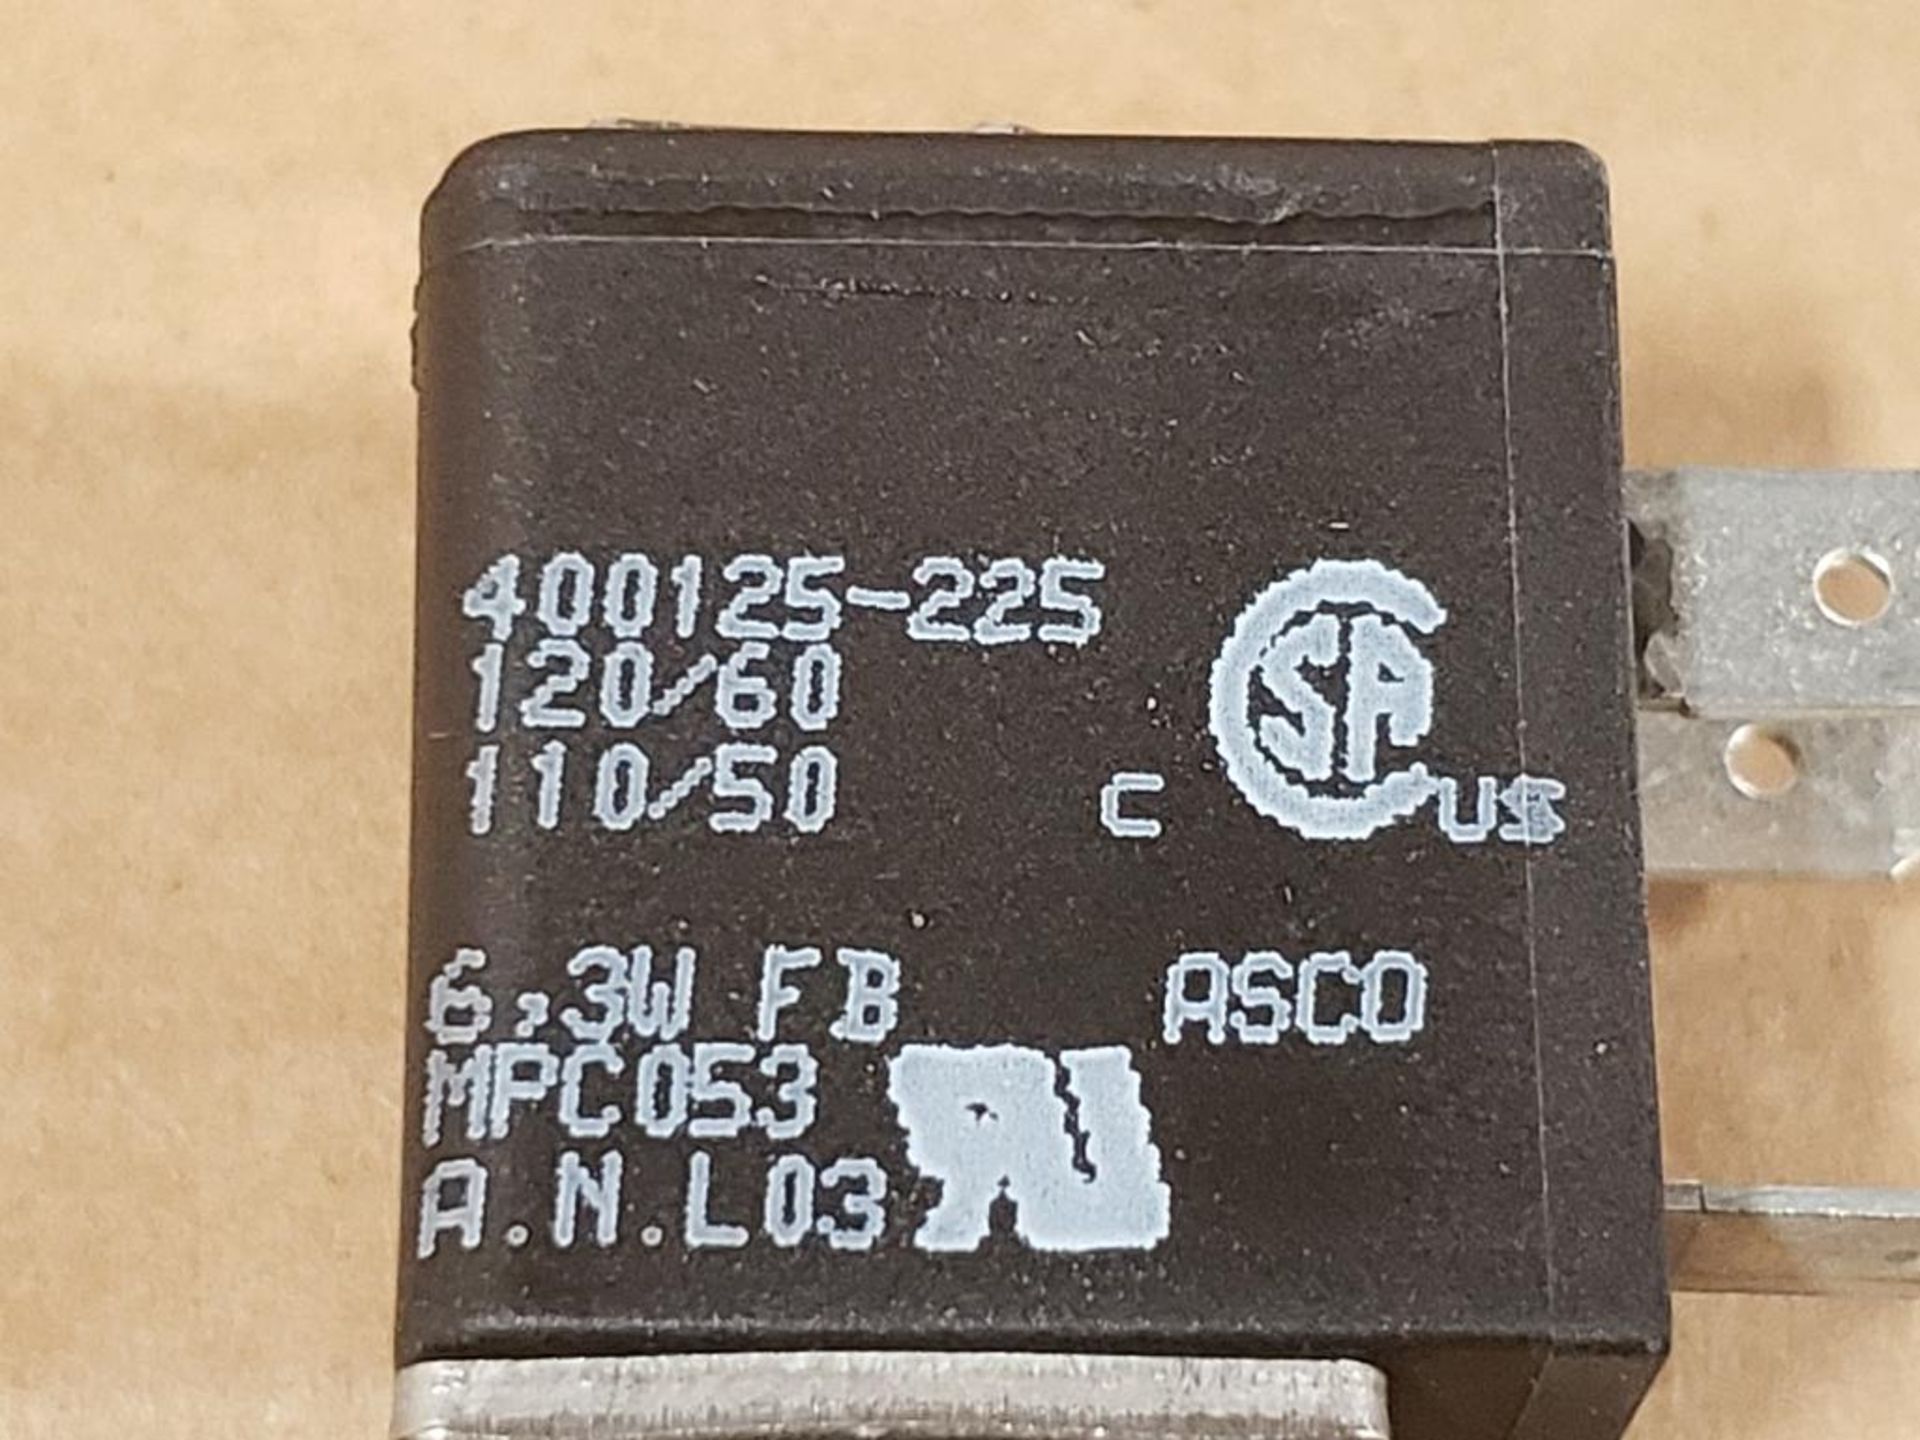 Qty 21 - ASCO SC8325B032V 120/60 solenoid valve. 55psi air/ 55 water / 55 l-oil. New in package. - Image 4 of 4